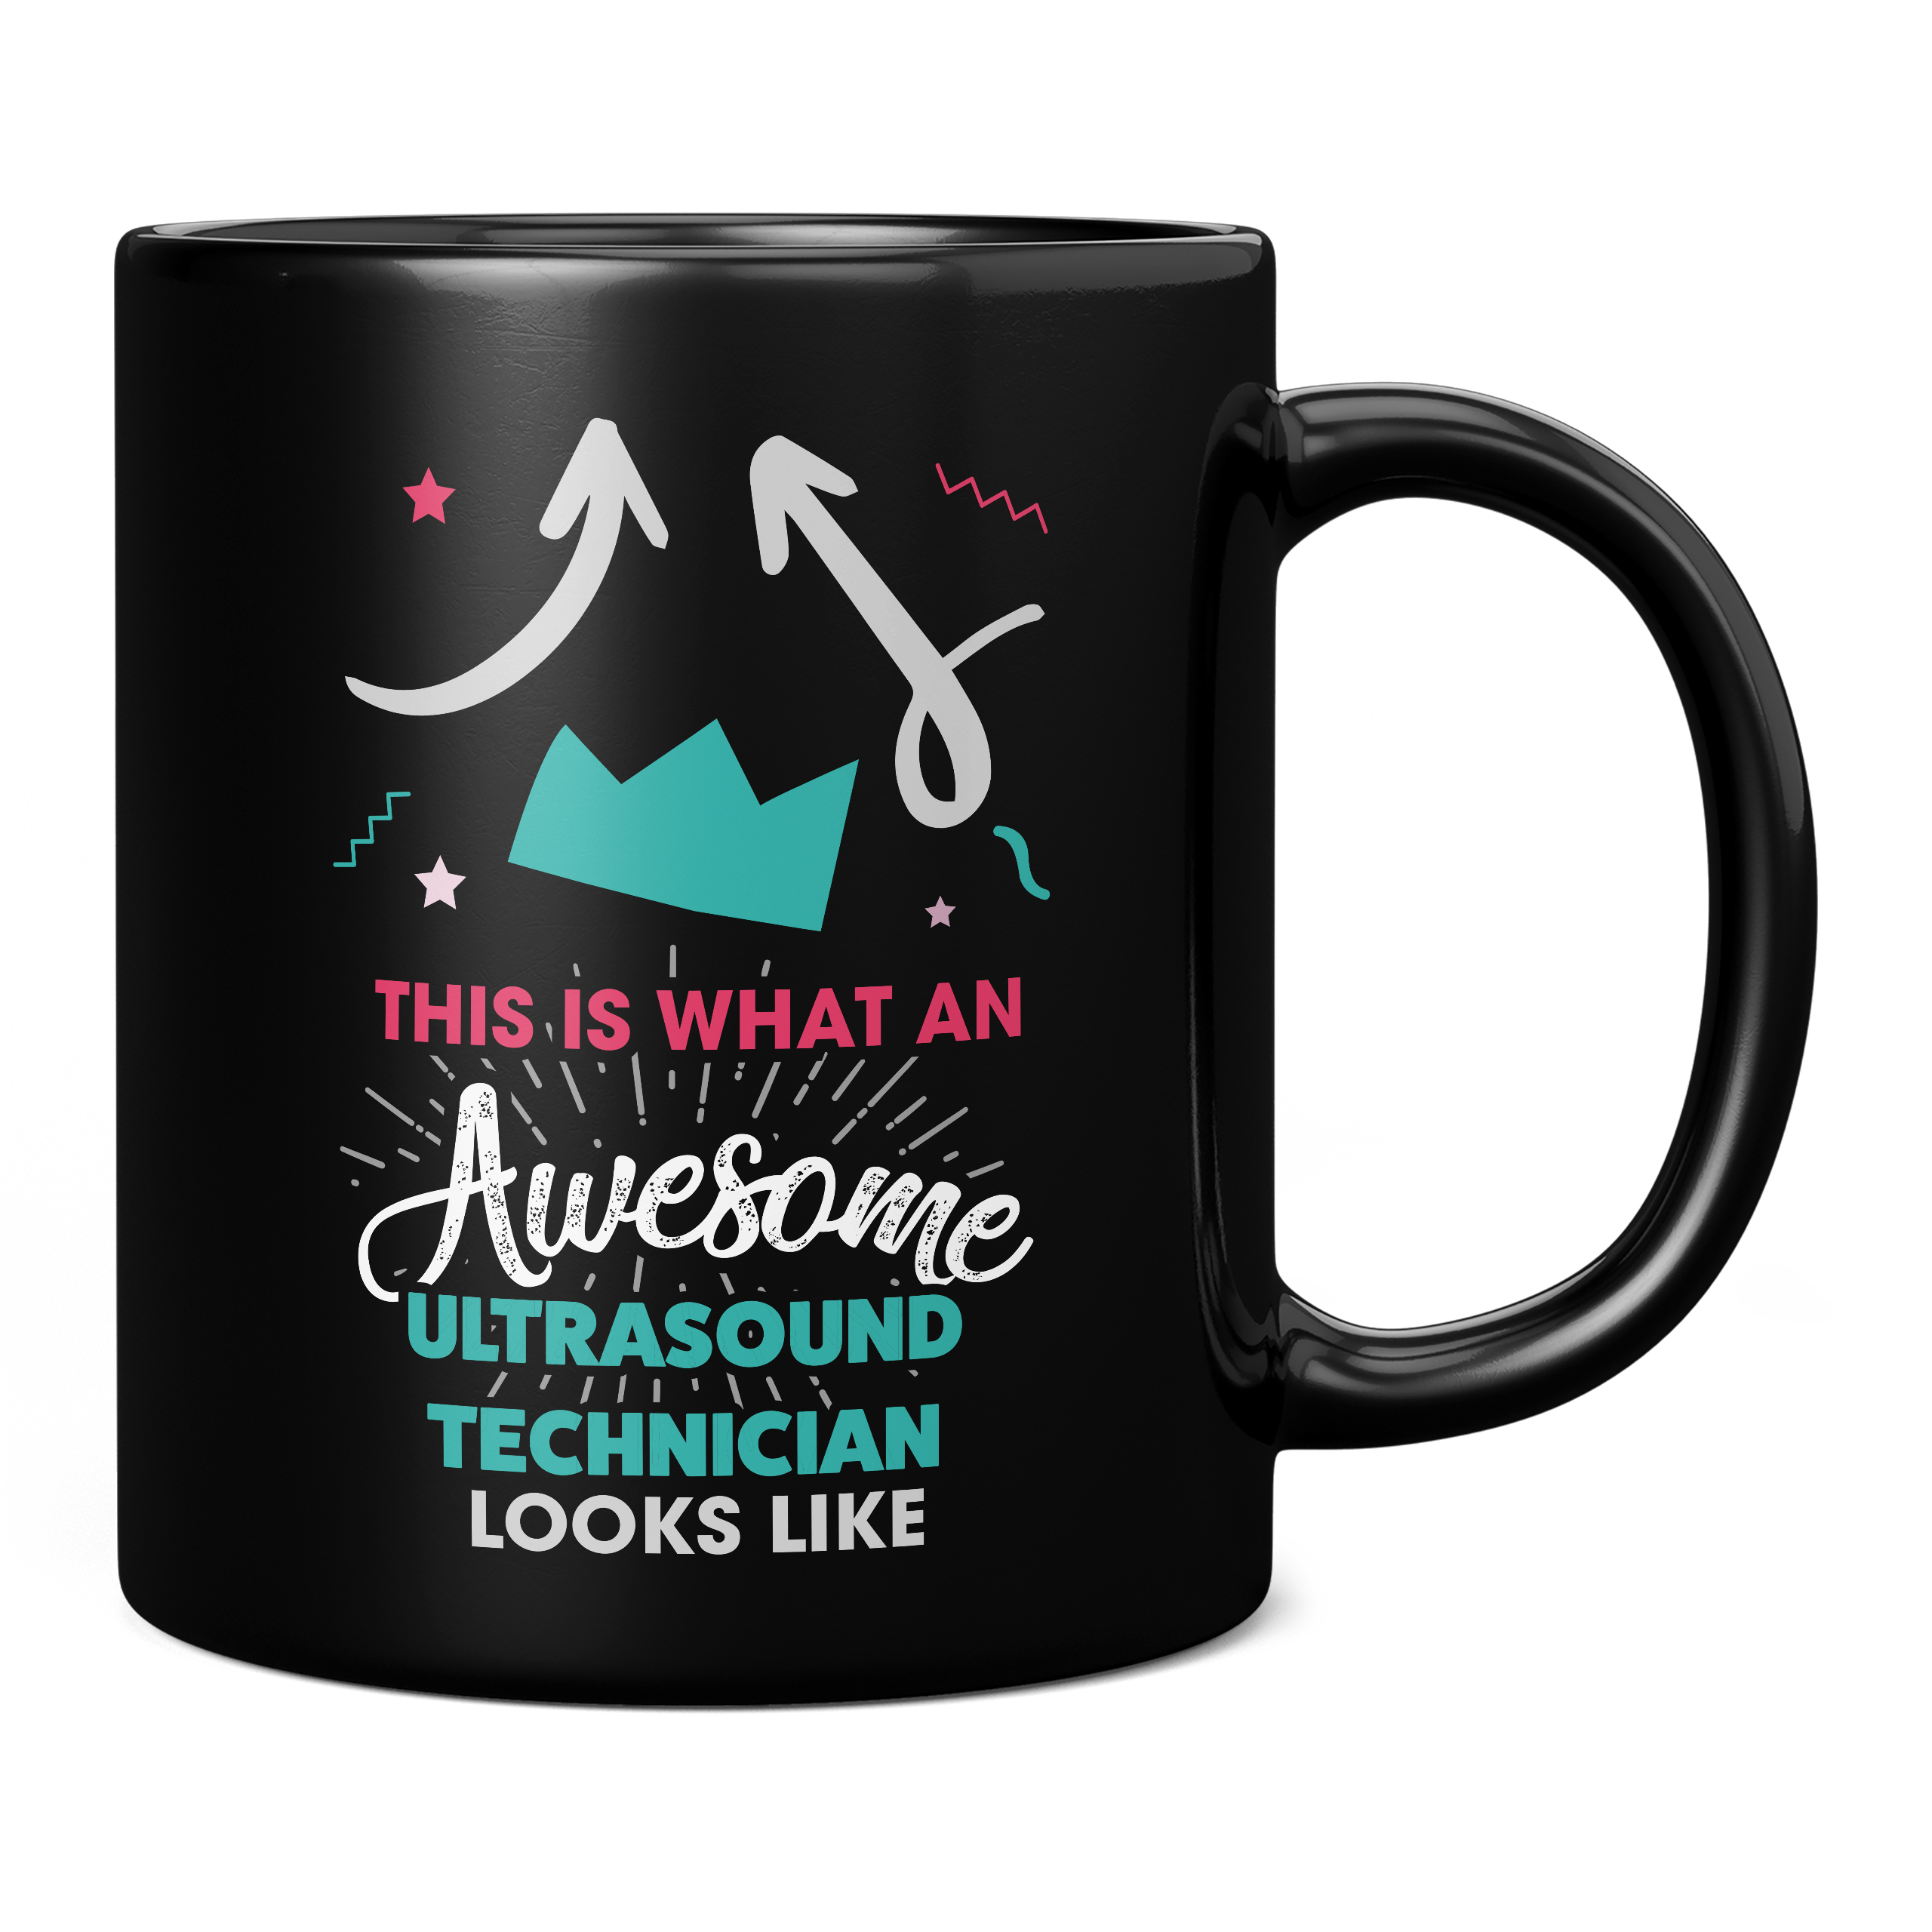 THIS IS WHAT AN AWESOME ULTRASOUND TECHNICIAN LOOKS LIKE 11OZ NOVELTY MUG